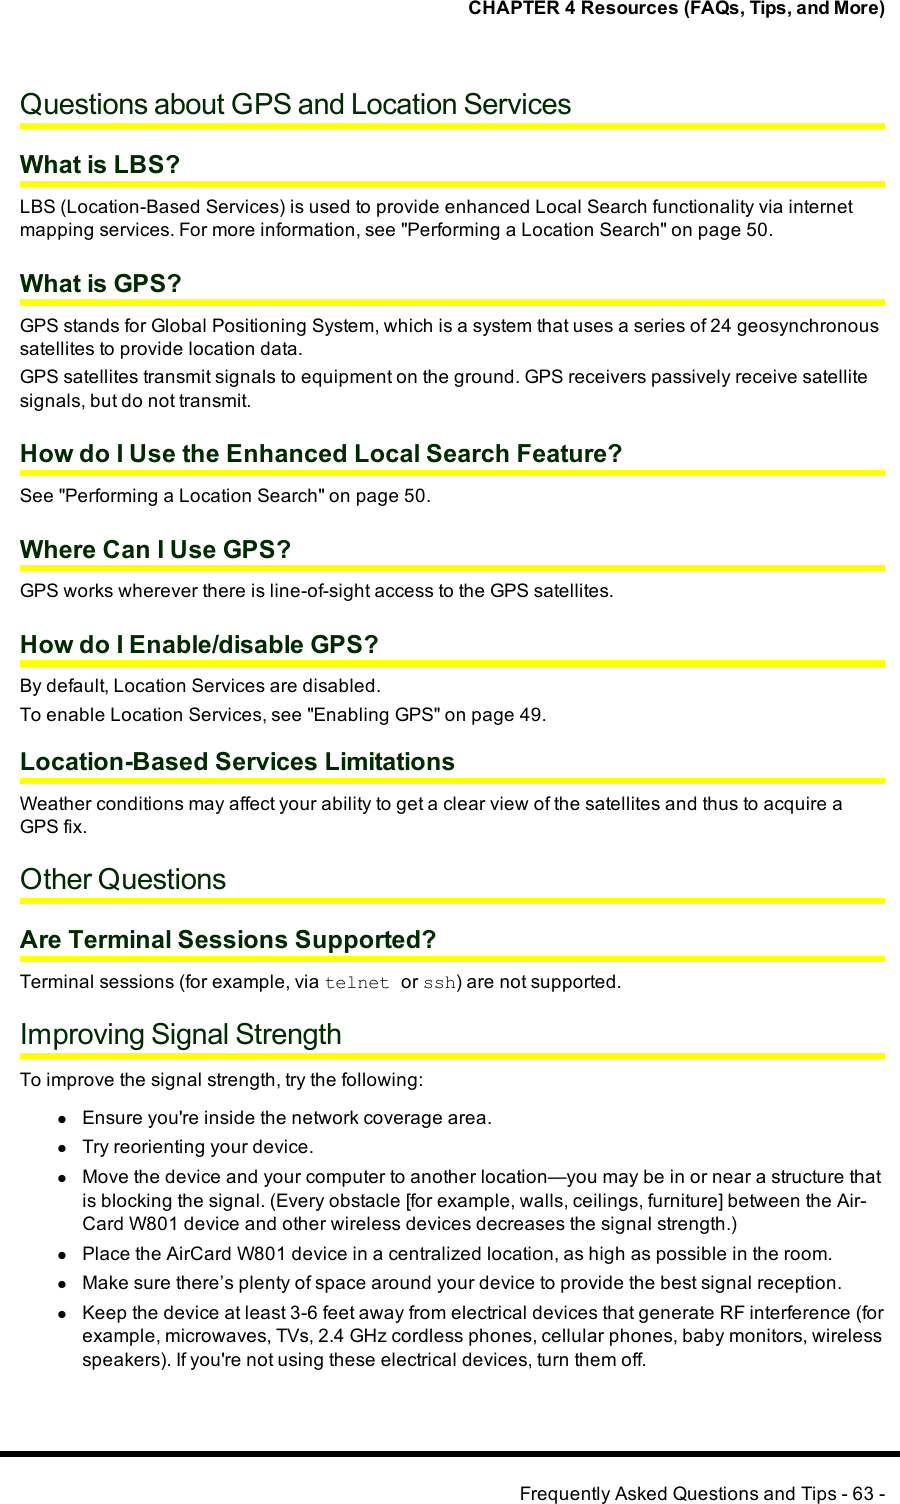 CHAPTER 4 Resources (FAQs, Tips, and More)Questions about GPS and Location ServicesWhat is LBS?LBS (Location-Based Services) is used to provide enhanced Local Search functionality via internetmapping services. For more information, see &quot;Performing a Location Search&quot; on page 50.What is GPS?GPS stands for Global Positioning System, which is a system that uses a series of 24 geosynchronoussatellites to provide location data.GPS satellites transmit signals to equipment on the ground. GPS receivers passively receive satellitesignals, but do not transmit.How do I Use the Enhanced Local Search Feature?See &quot;Performing a Location Search&quot; on page 50.Where Can I Use GPS?GPS works wherever there is line-of-sight access to the GPS satellites.How do I Enable/disable GPS?By default, Location Services are disabled.To enable Location Services, see &quot;Enabling GPS&quot; on page 49.Location-Based Services LimitationsWeather conditions may affect your ability to get a clear view of the satellites and thus to acquire aGPS fix.Other QuestionsAre Terminal Sessions Supported?Terminal sessions (for example, via telnet or ssh) are not supported.Improving Signal StrengthTo improve the signal strength, try the following:lEnsure you&apos;re inside the network coverage area.lTry reorienting your device.lMove the device and your computer to another location—you may be in or near a structure thatis blocking the signal. (Every obstacle [for example, walls, ceilings, furniture] between the Air-Card W801 device and other wireless devices decreases the signal strength.)lPlace the AirCard W801 device in a centralized location, as high as possible in the room.lMake sure there’s plenty of space around your device to provide the best signal reception.lKeep the device at least 3-6 feet away from electrical devices that generate RF interference (forexample, microwaves, TVs, 2.4 GHz cordless phones, cellular phones, baby monitors, wirelessspeakers). If you&apos;re not using these electrical devices, turn them off.Frequently Asked Questions and Tips - 63 -